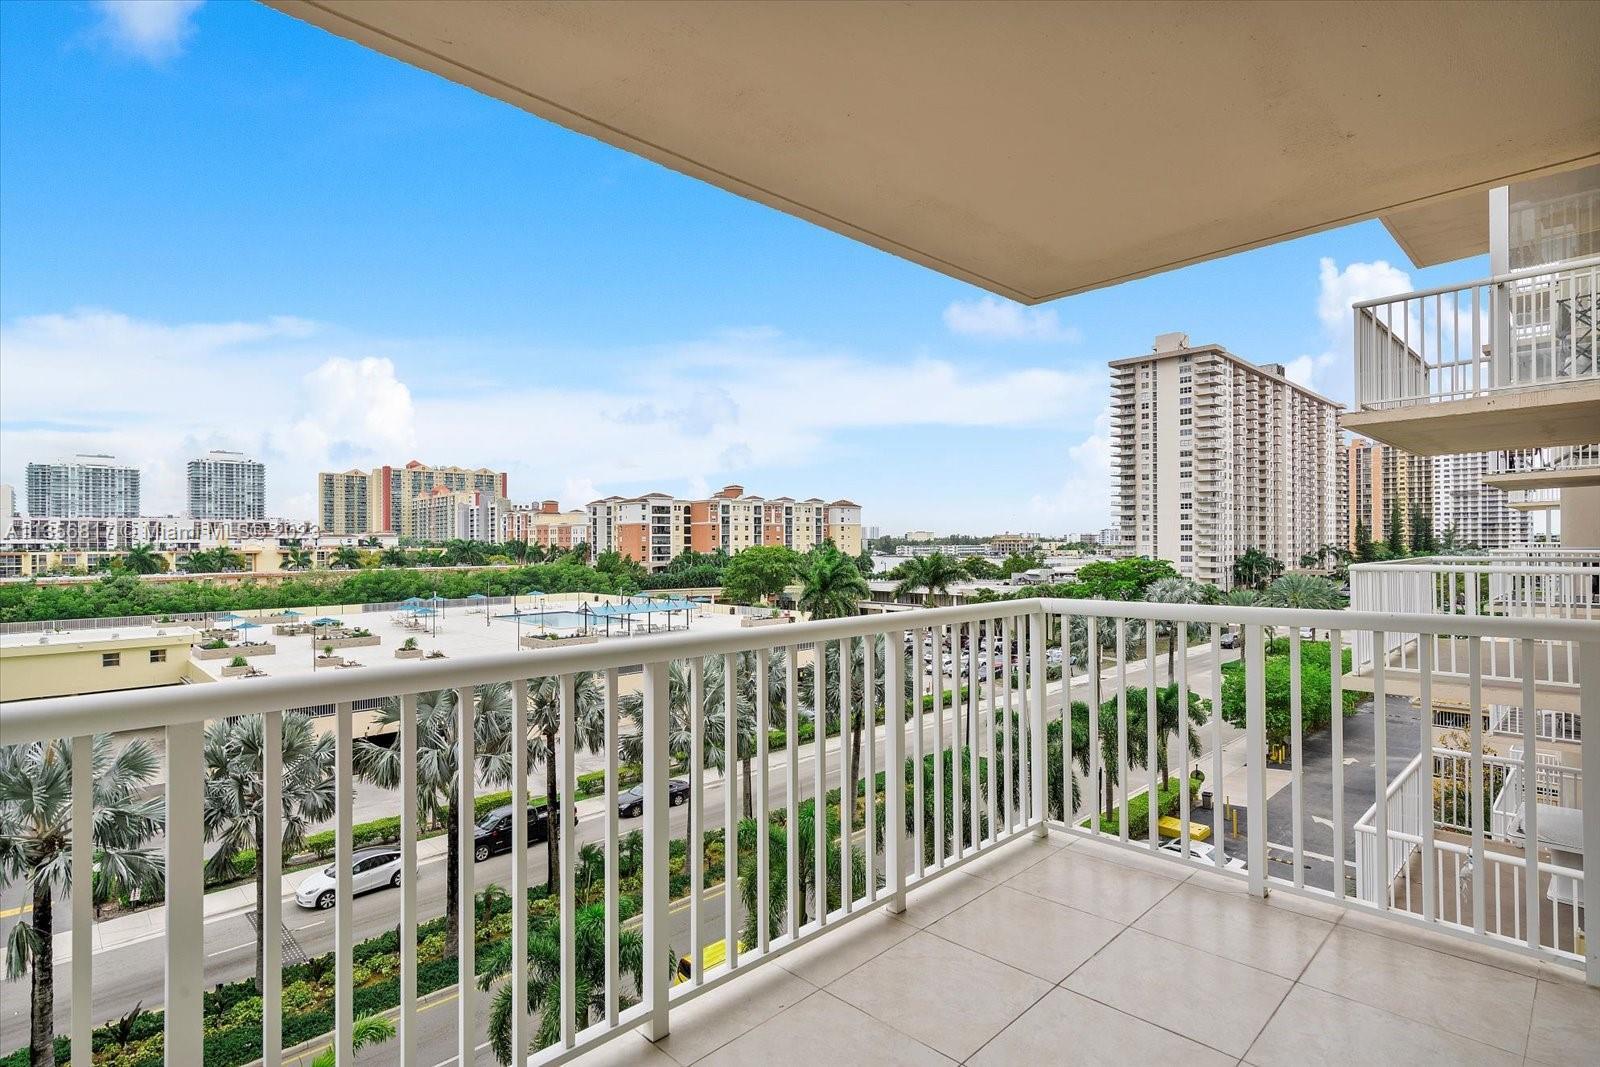 2/2 convertible located in the heart of Sunny Isles, just a few steps from the beach. Apartment is f